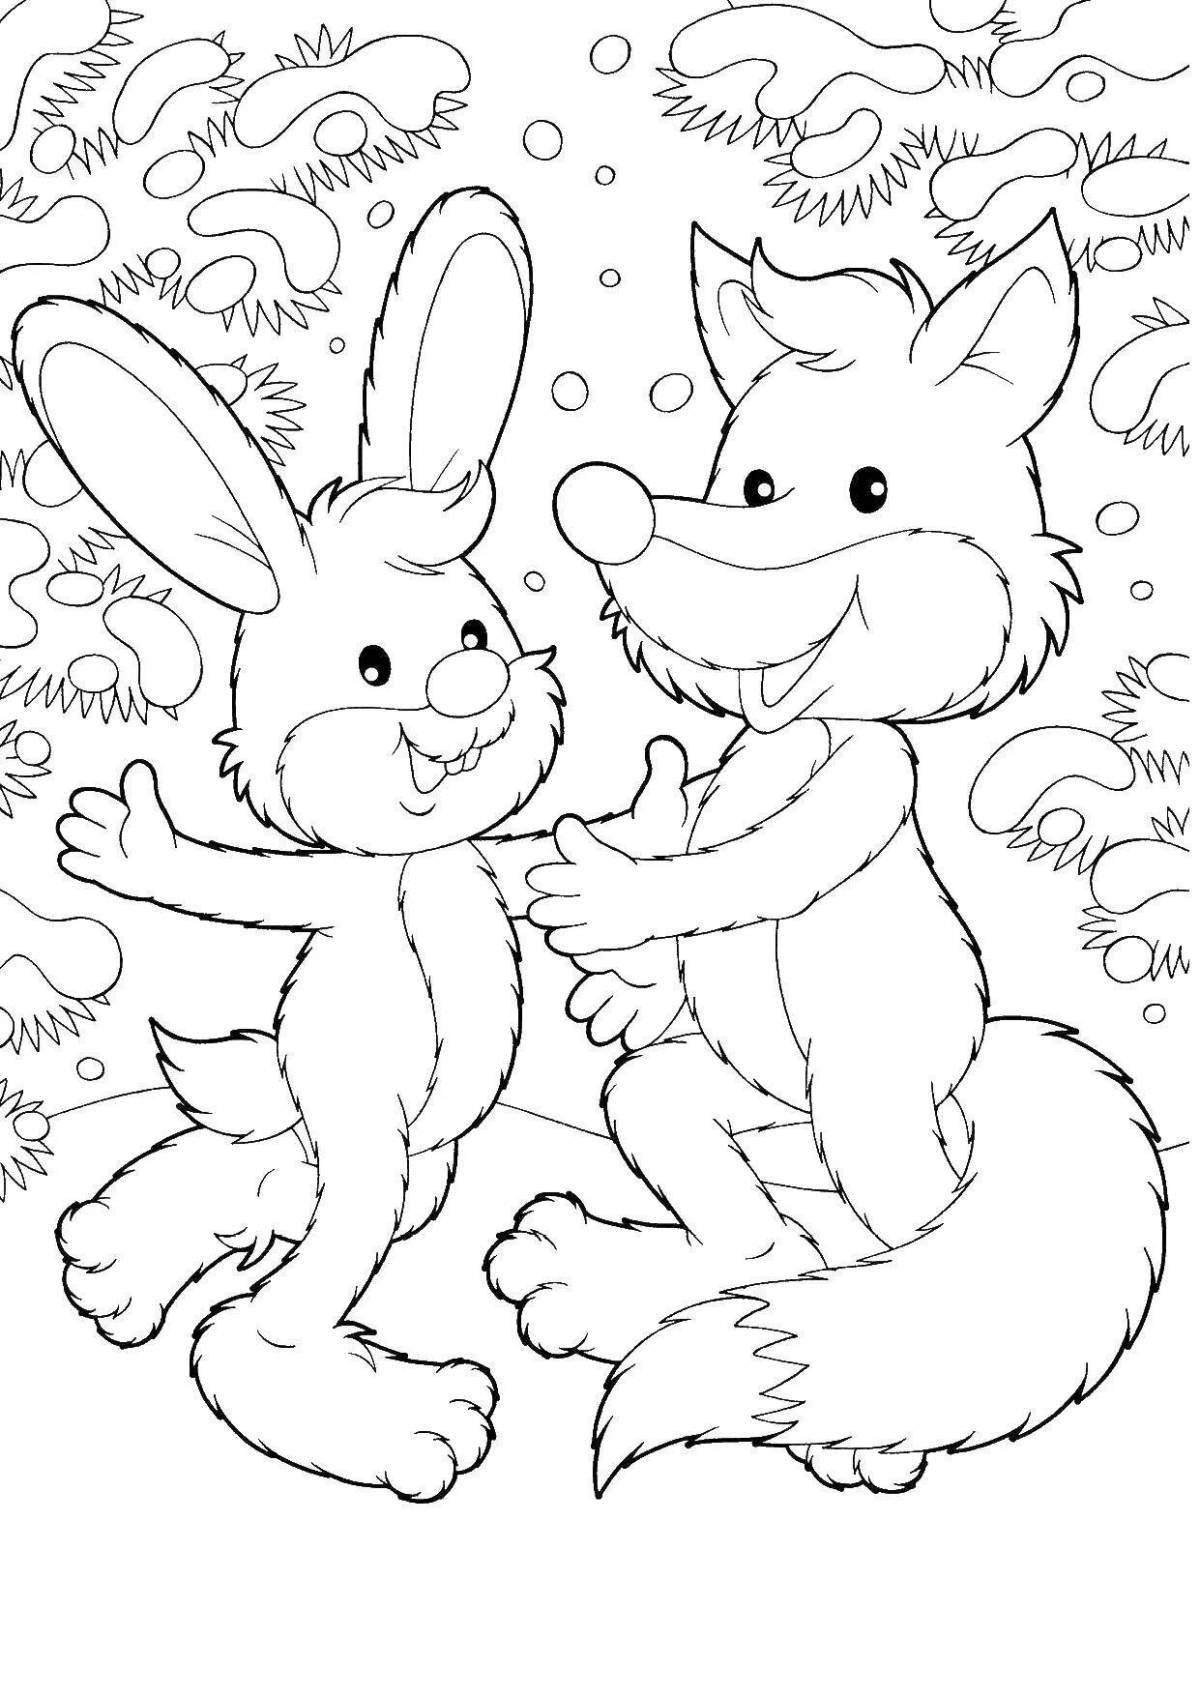 Fabulous hare and tree coloring page